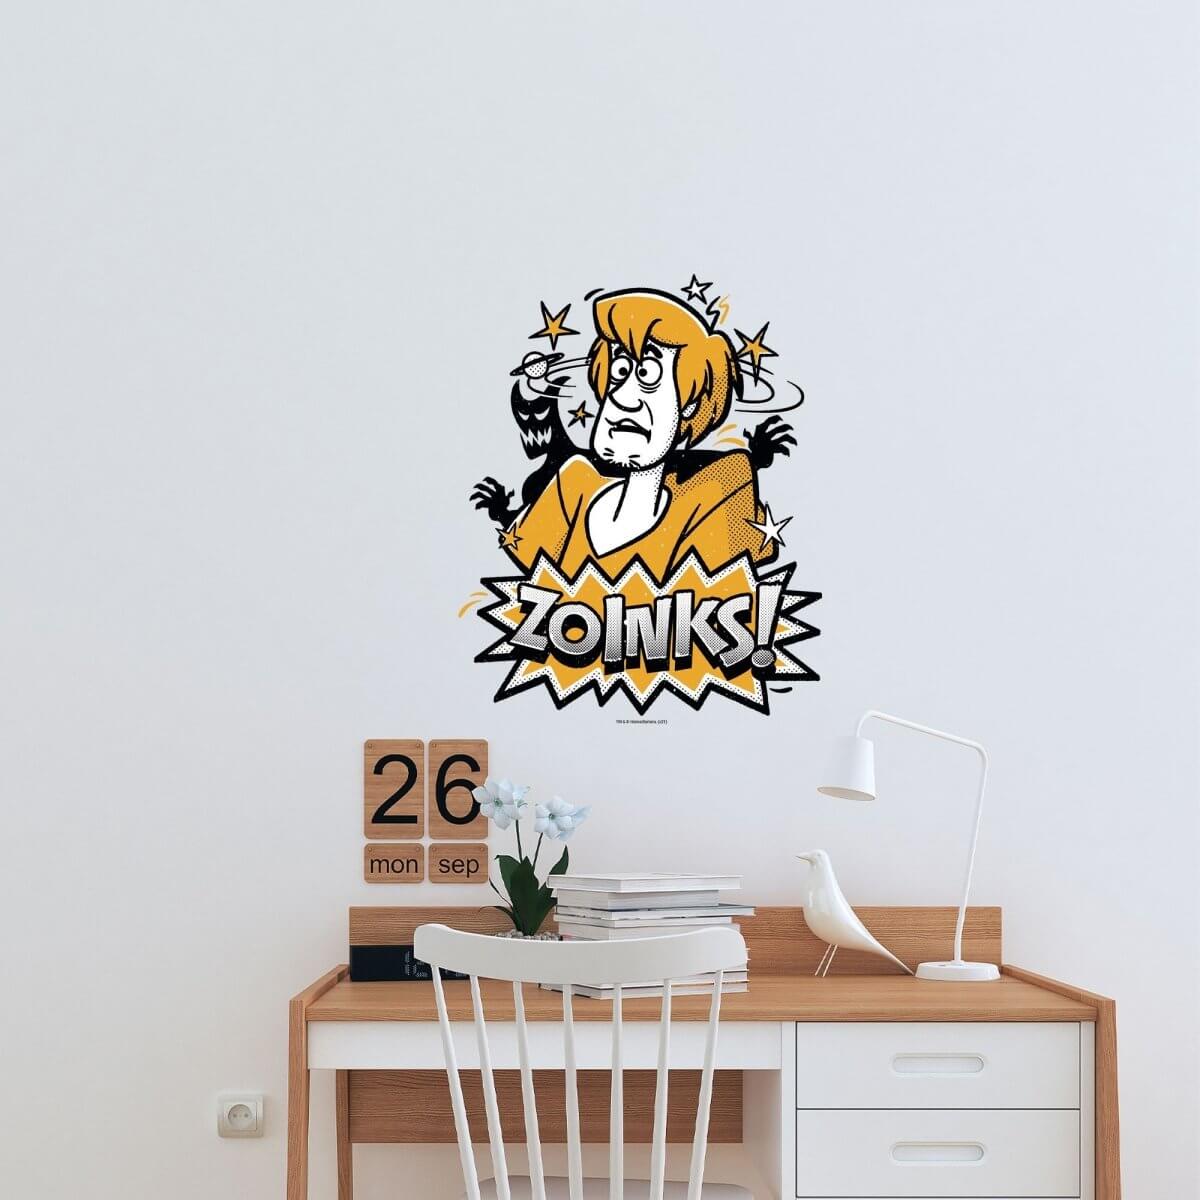 Kismet Decals Home & Room Decor Scooby-Doo Zoinks! with Shaggy Wall decal sticker - officially licensed - latex printed with no solvent odor - Kismet Decals